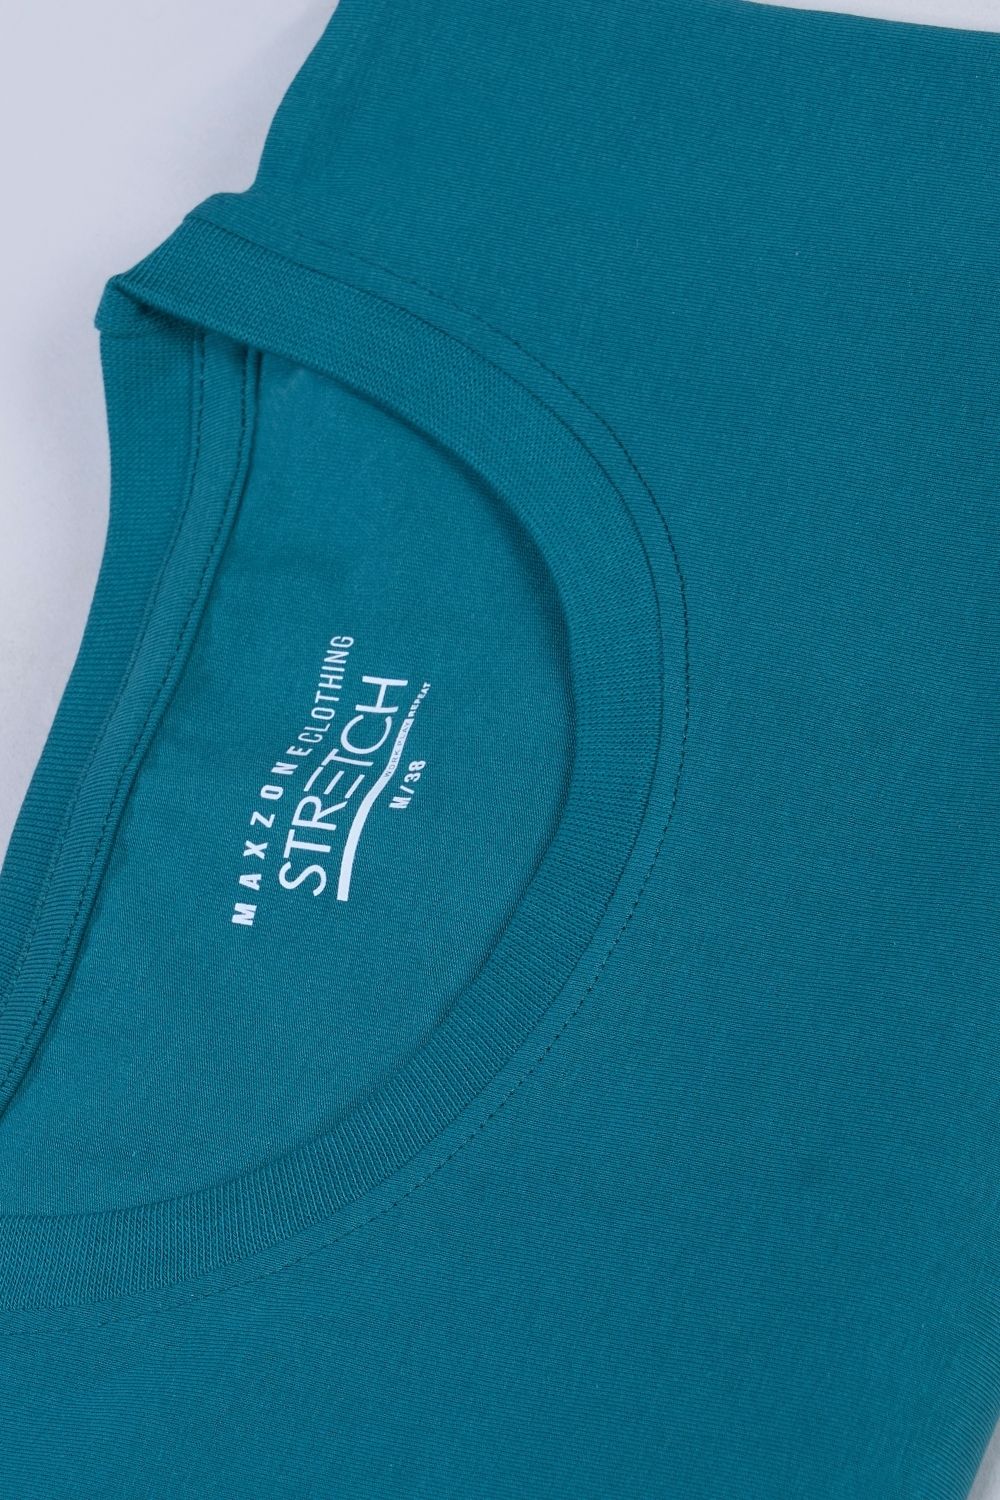 Cotton Stretch T shirt for men in the the solid color British Green with half sleeves and round neck, close up view.